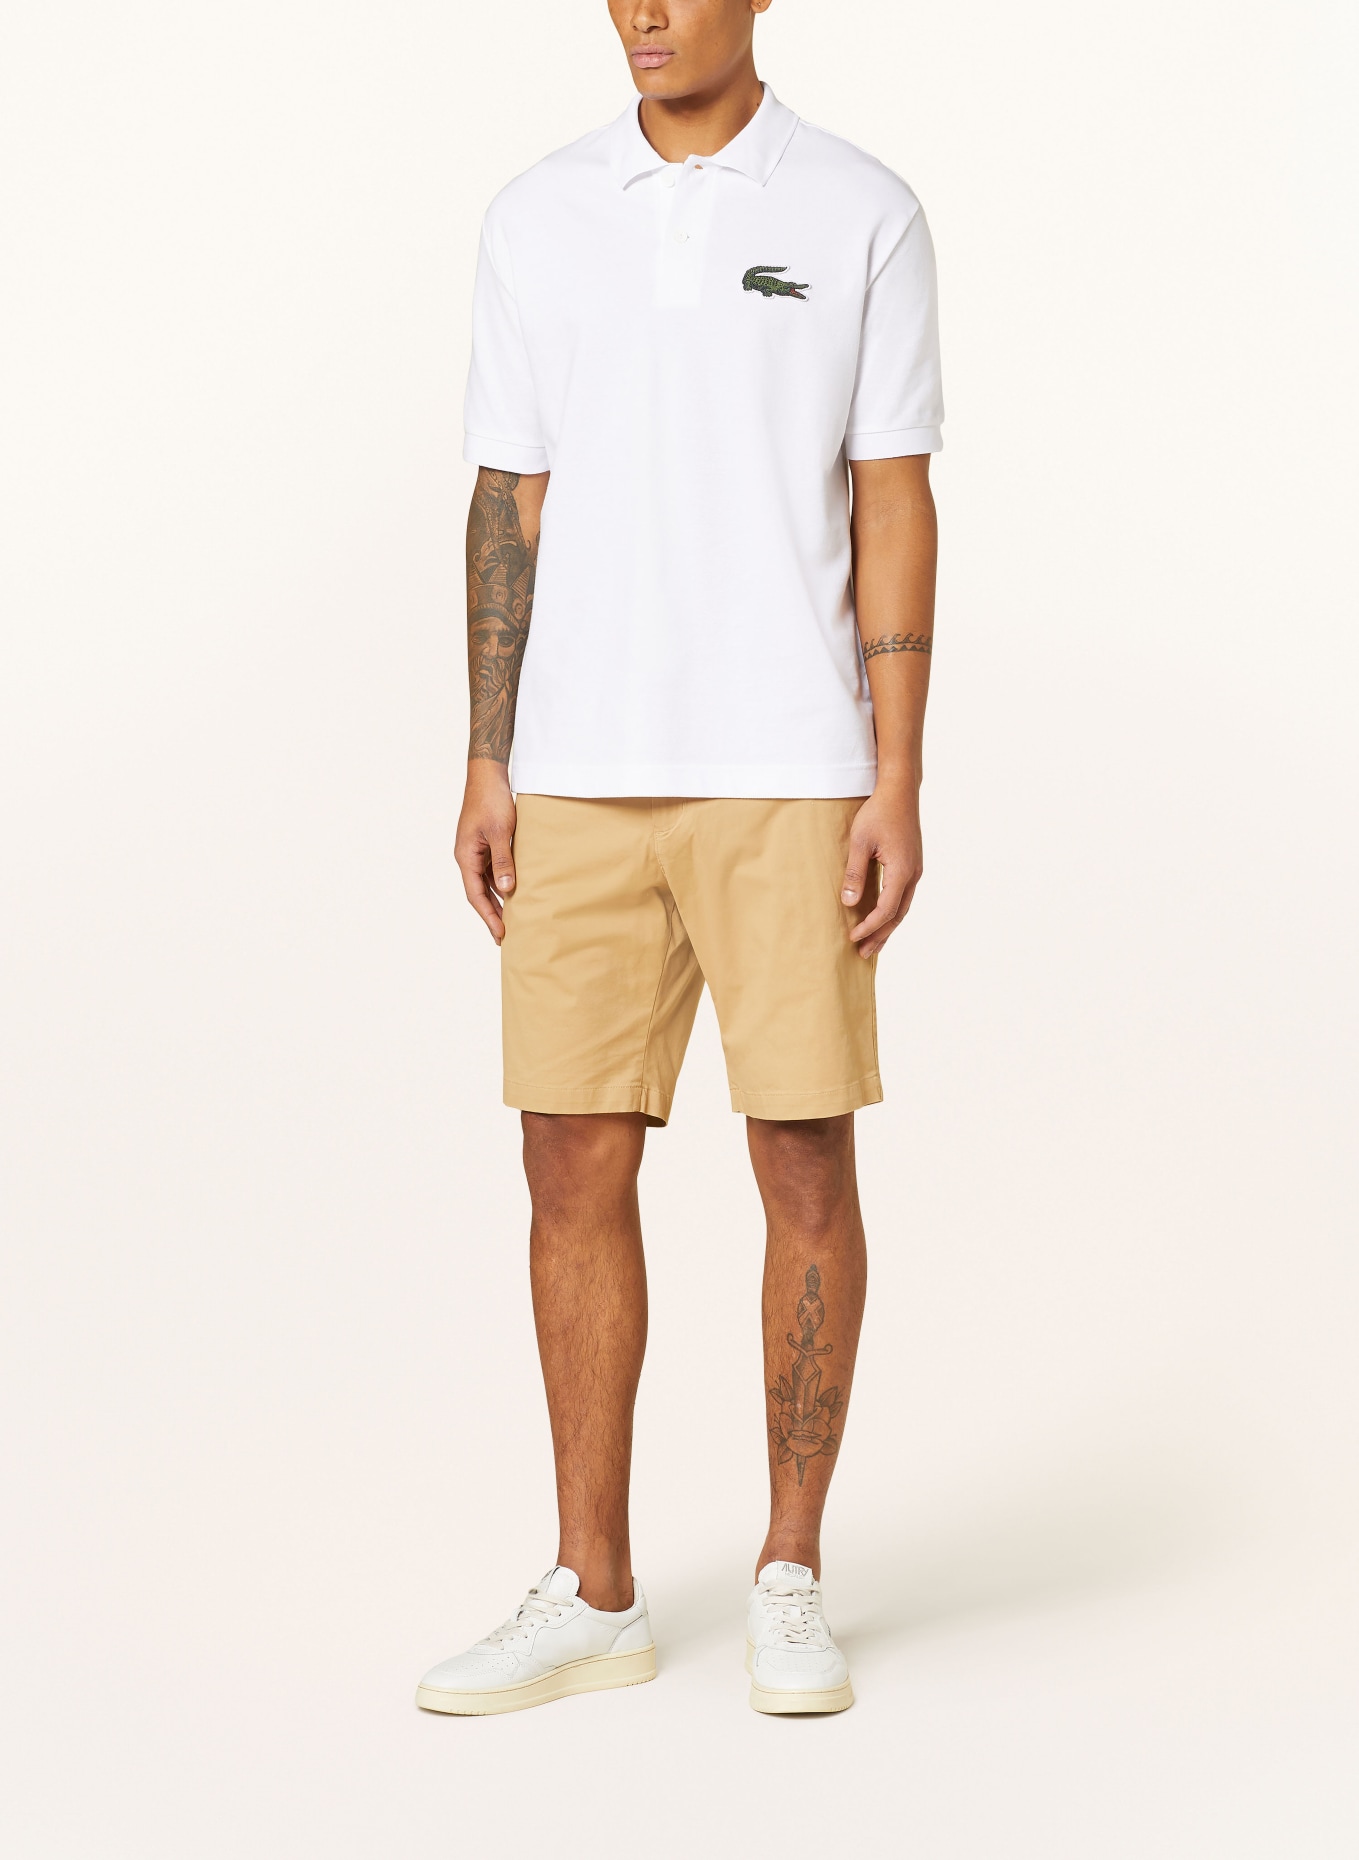 LACOSTE Piqué-Poloshirt Loose Fit, Farbe: WEISS (Bild 2)